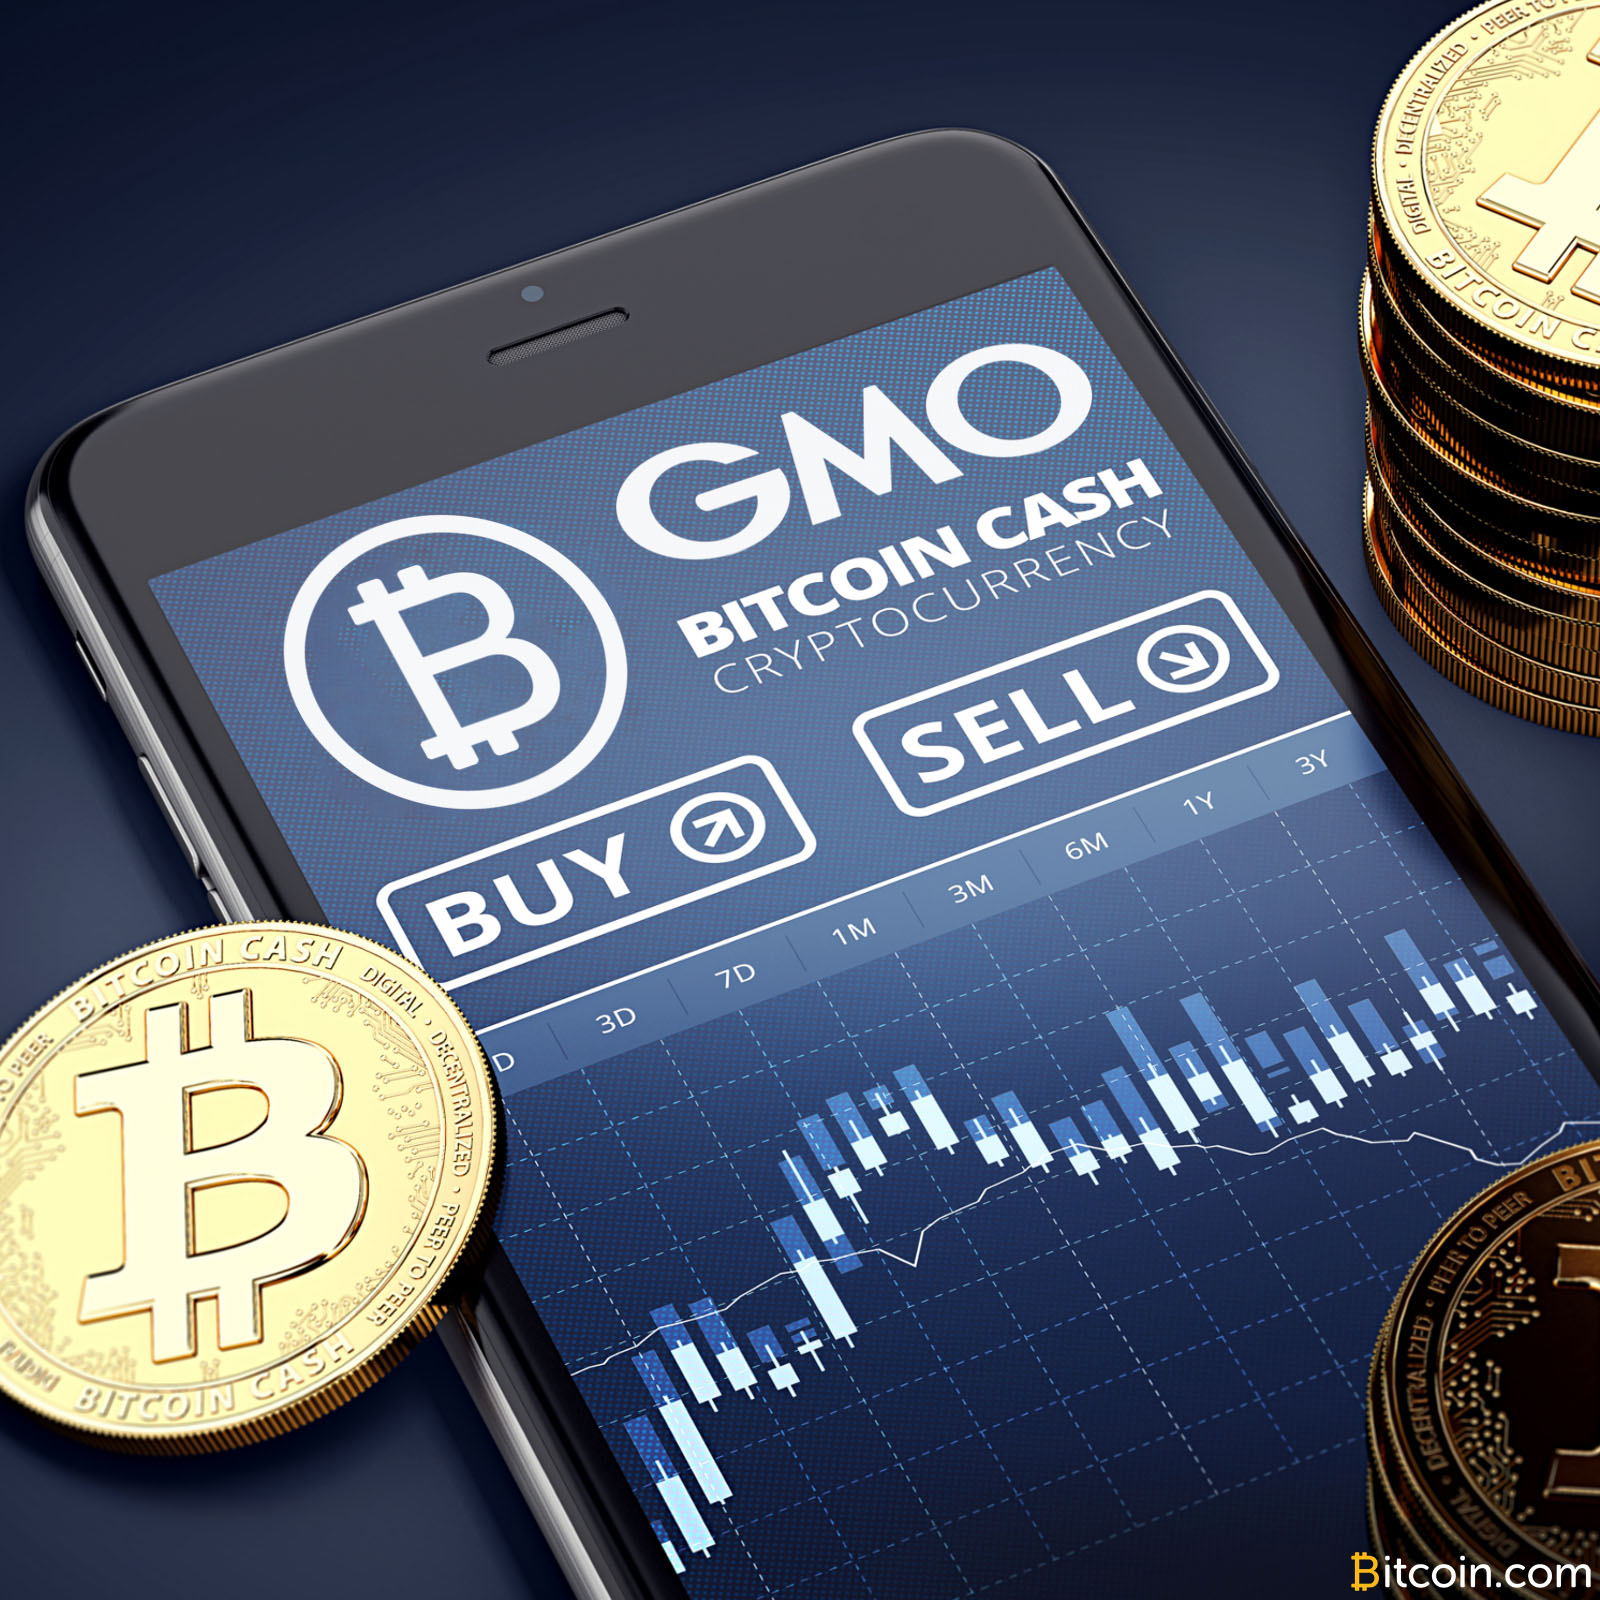 GMO Enables Bitcoin Cash and Ether Trading With Promotional